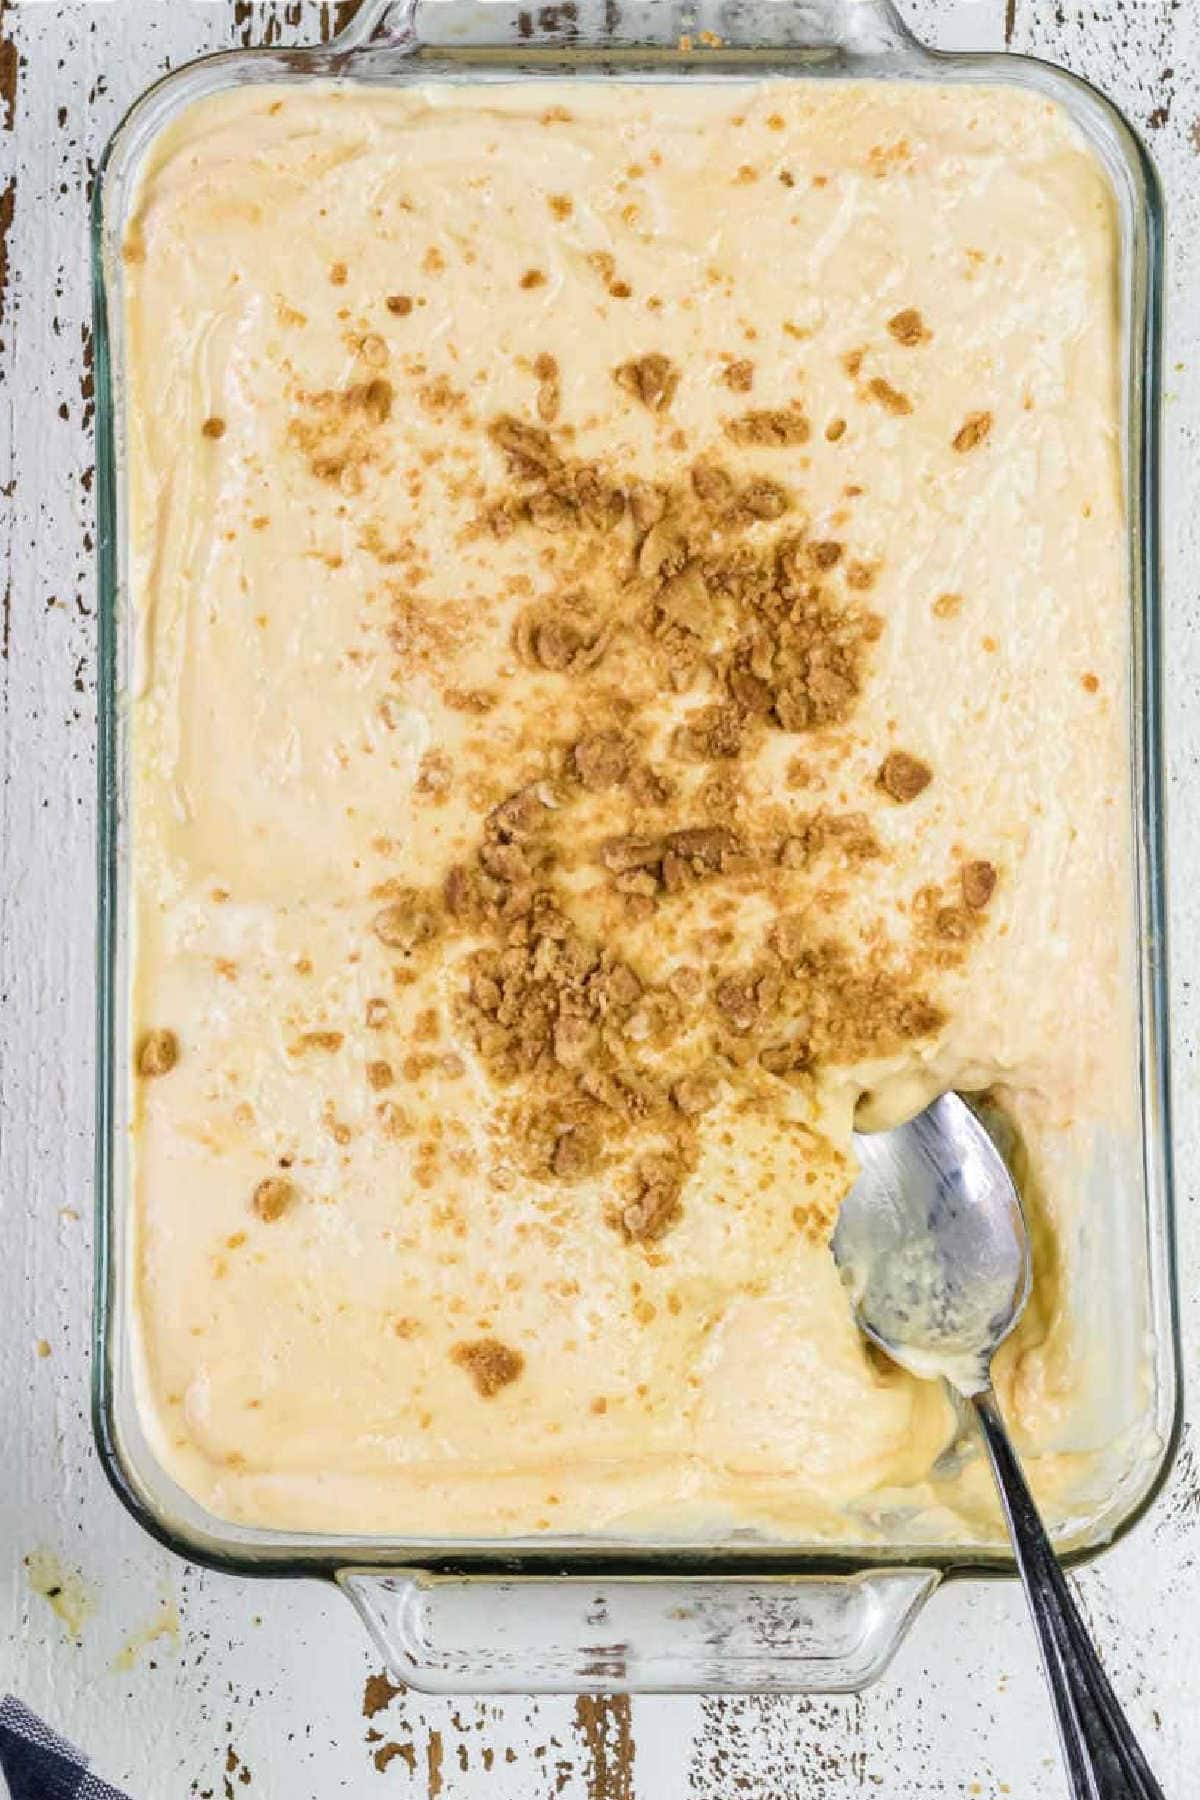 Overhead view of banana pudding with a spoon in it ready to be served.